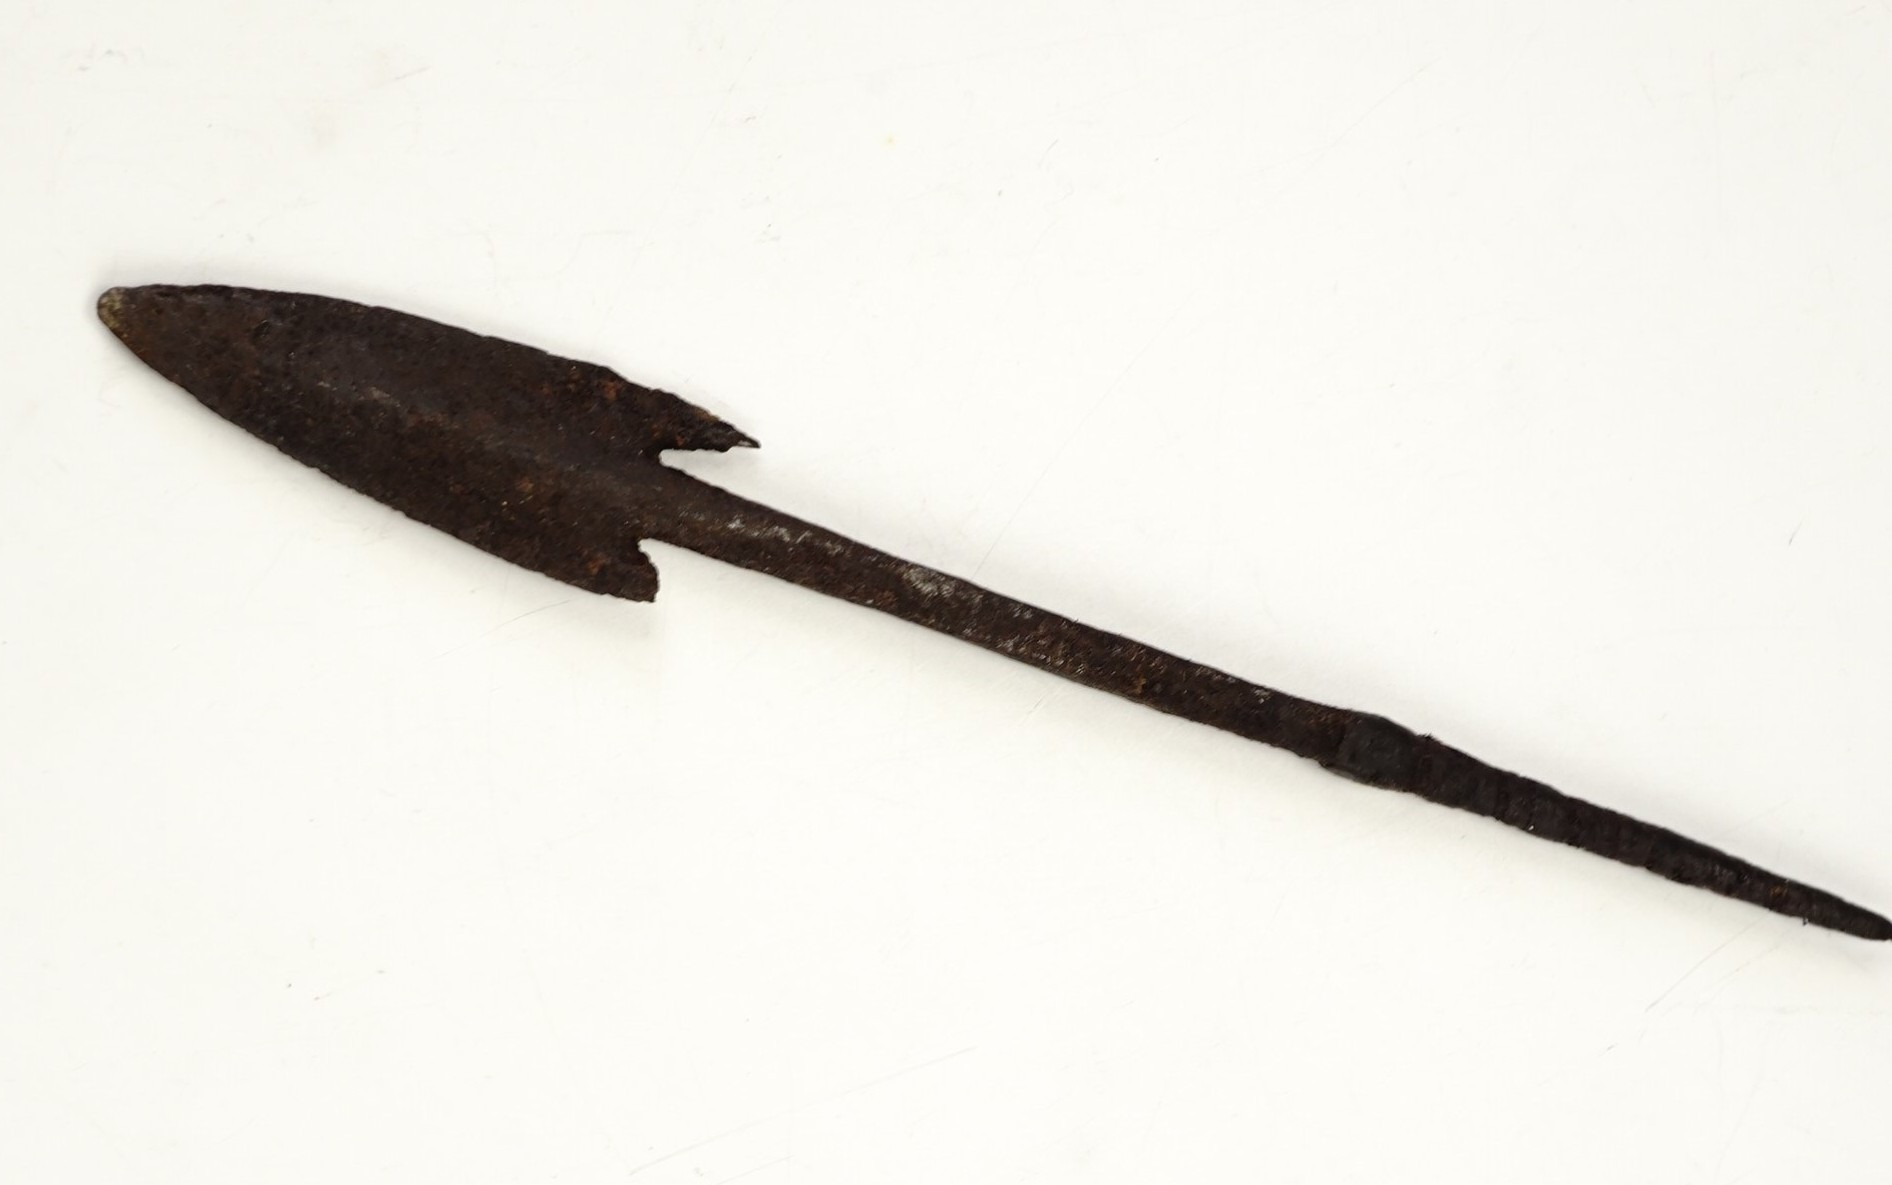 A medieval iron spear or arrow head, of barbed and tanged form, 18 cm